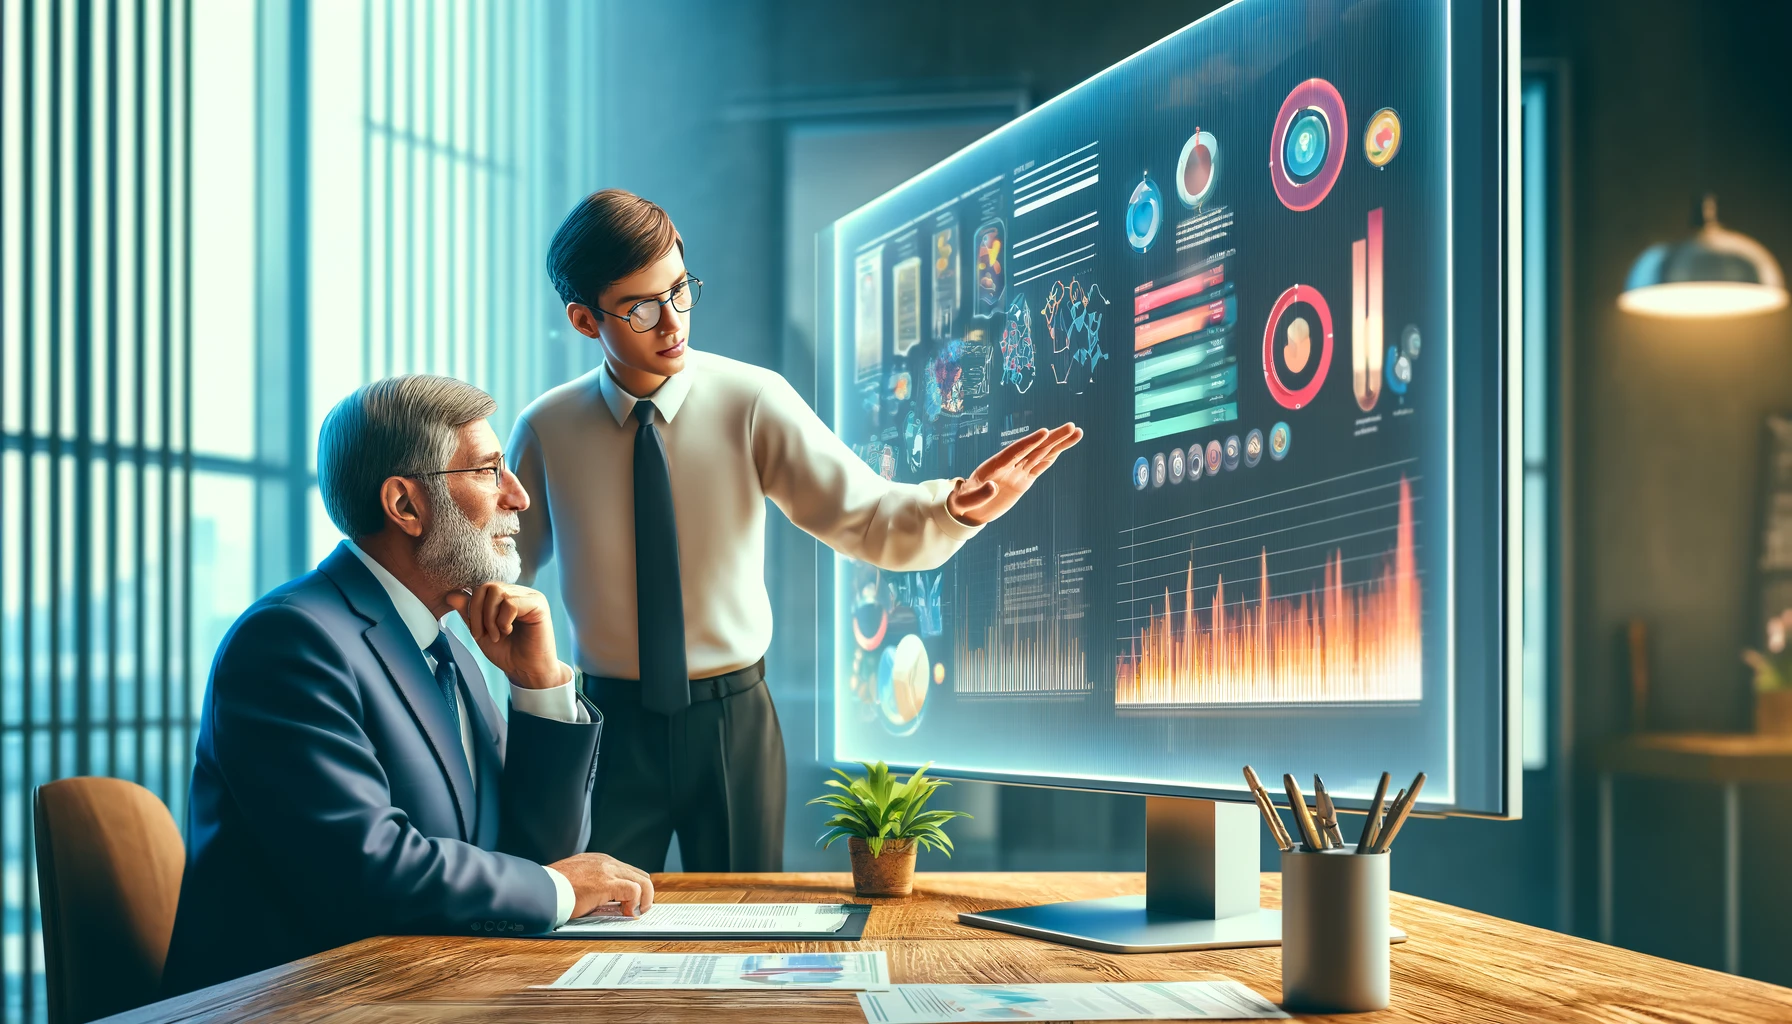 Here is the illustration depicting a researcher presenting research data to a government official using an infographic on a monitor. The image captures the moment of understanding and satisfaction from the official, highlighting the effectiveness of the data visualization.